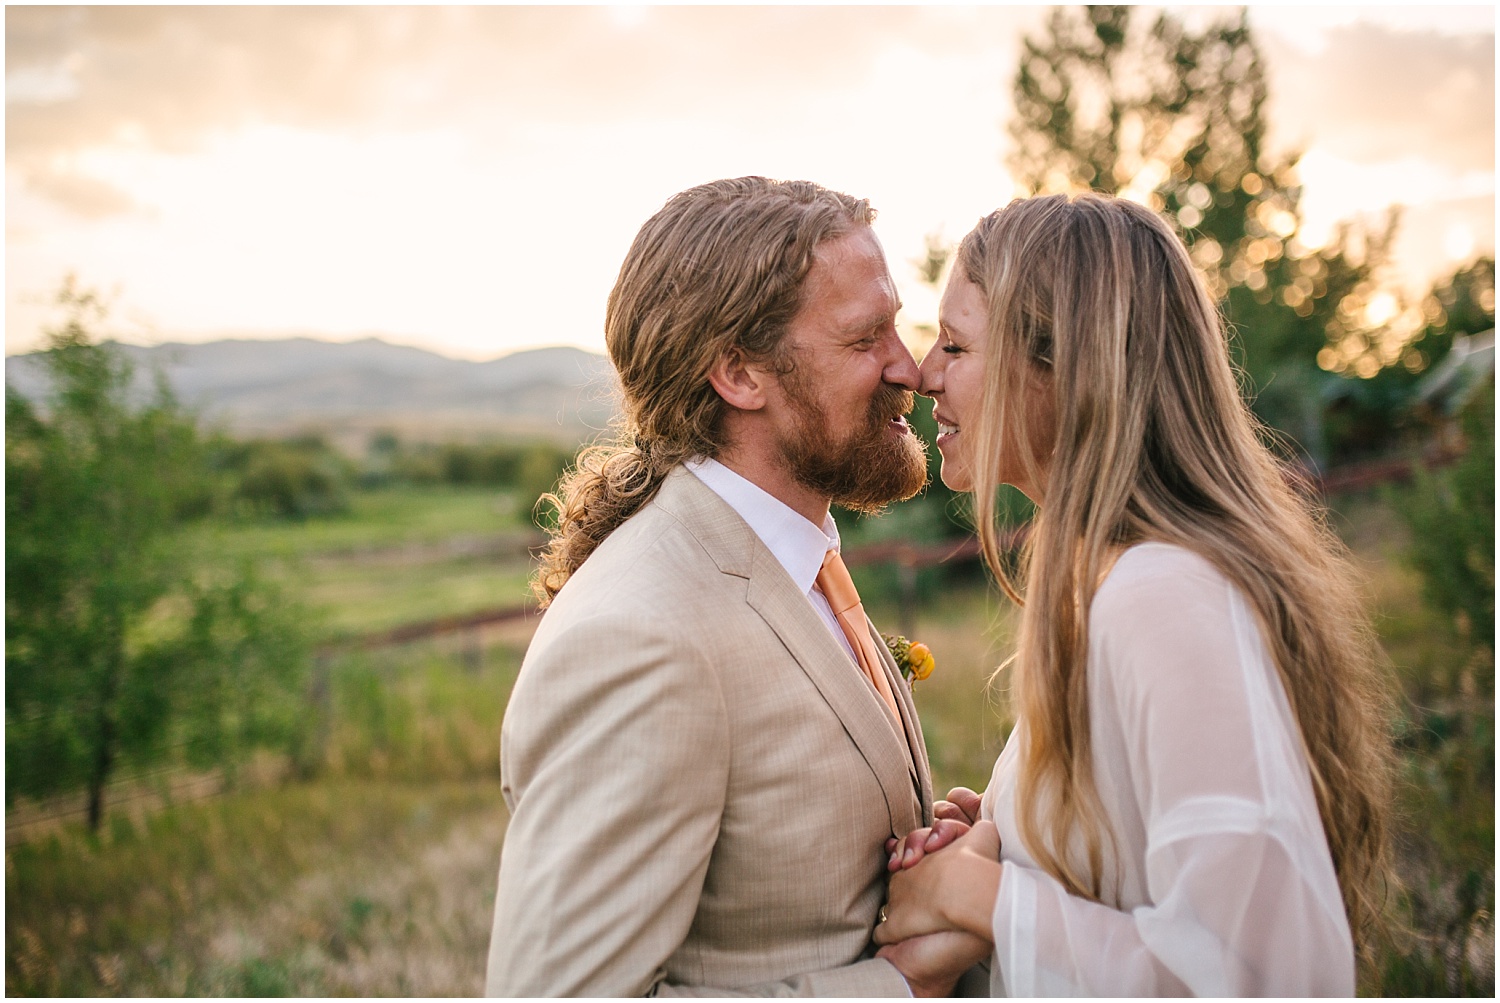 Bride and groom kissing in the mountains at sunset at Lone Hawk Farm wedding in Longmont Colorado